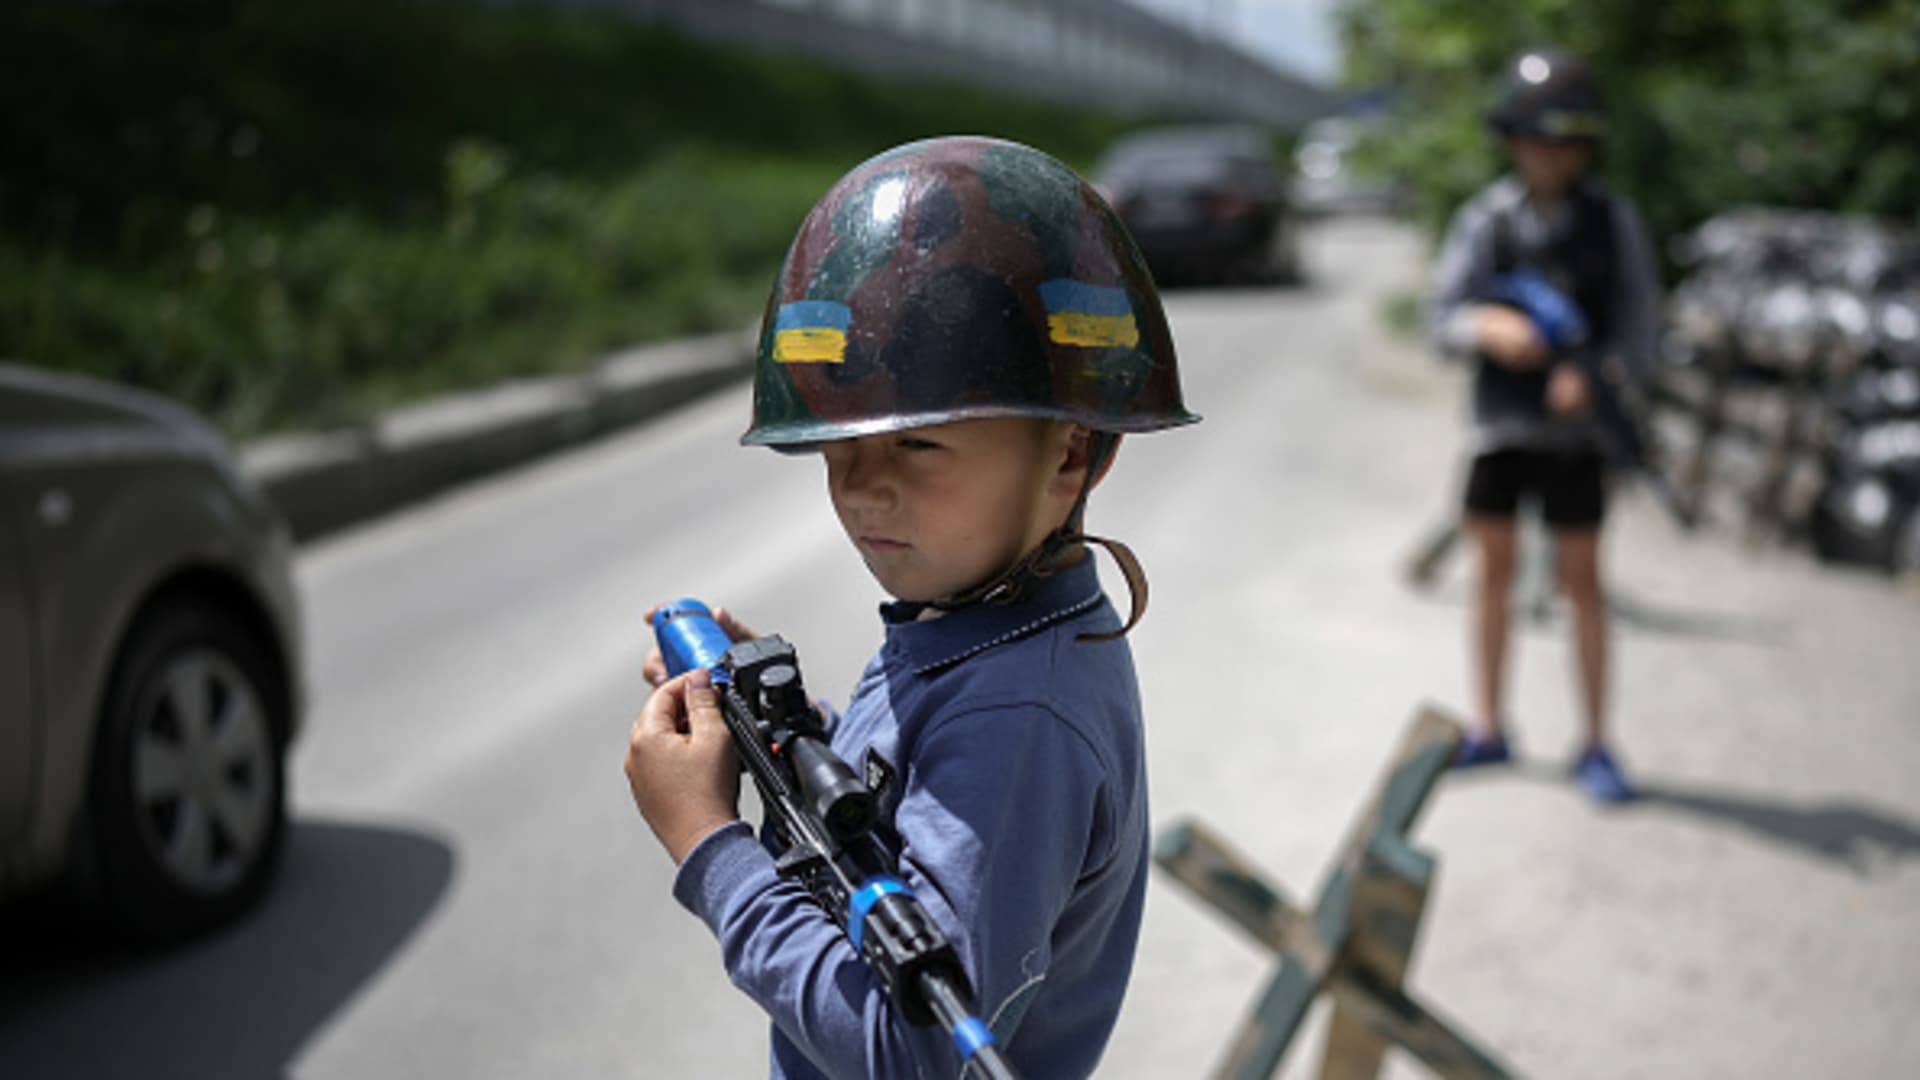 STOYANKA, UKRAINE - MAY 27: Ukrainian boys Andrii, aged 12 and his friend Valentyn 6, play at being soldiers and man their makeshift checkpoint in their village next to a school crossing. The two boys have become well known to passing motorists on May 27, 2022 in Stoyanka, Ukraine. As Russia concentrates its attack on the east and south of the country, residents of the Kyiv region are returning to assess the war's toll on their communities. The towns around the capital were heavily damaged following weeks of brutal war as Russia made its failed bid to take Kyiv.(Photo by Christopher Furlong/Getty Images)